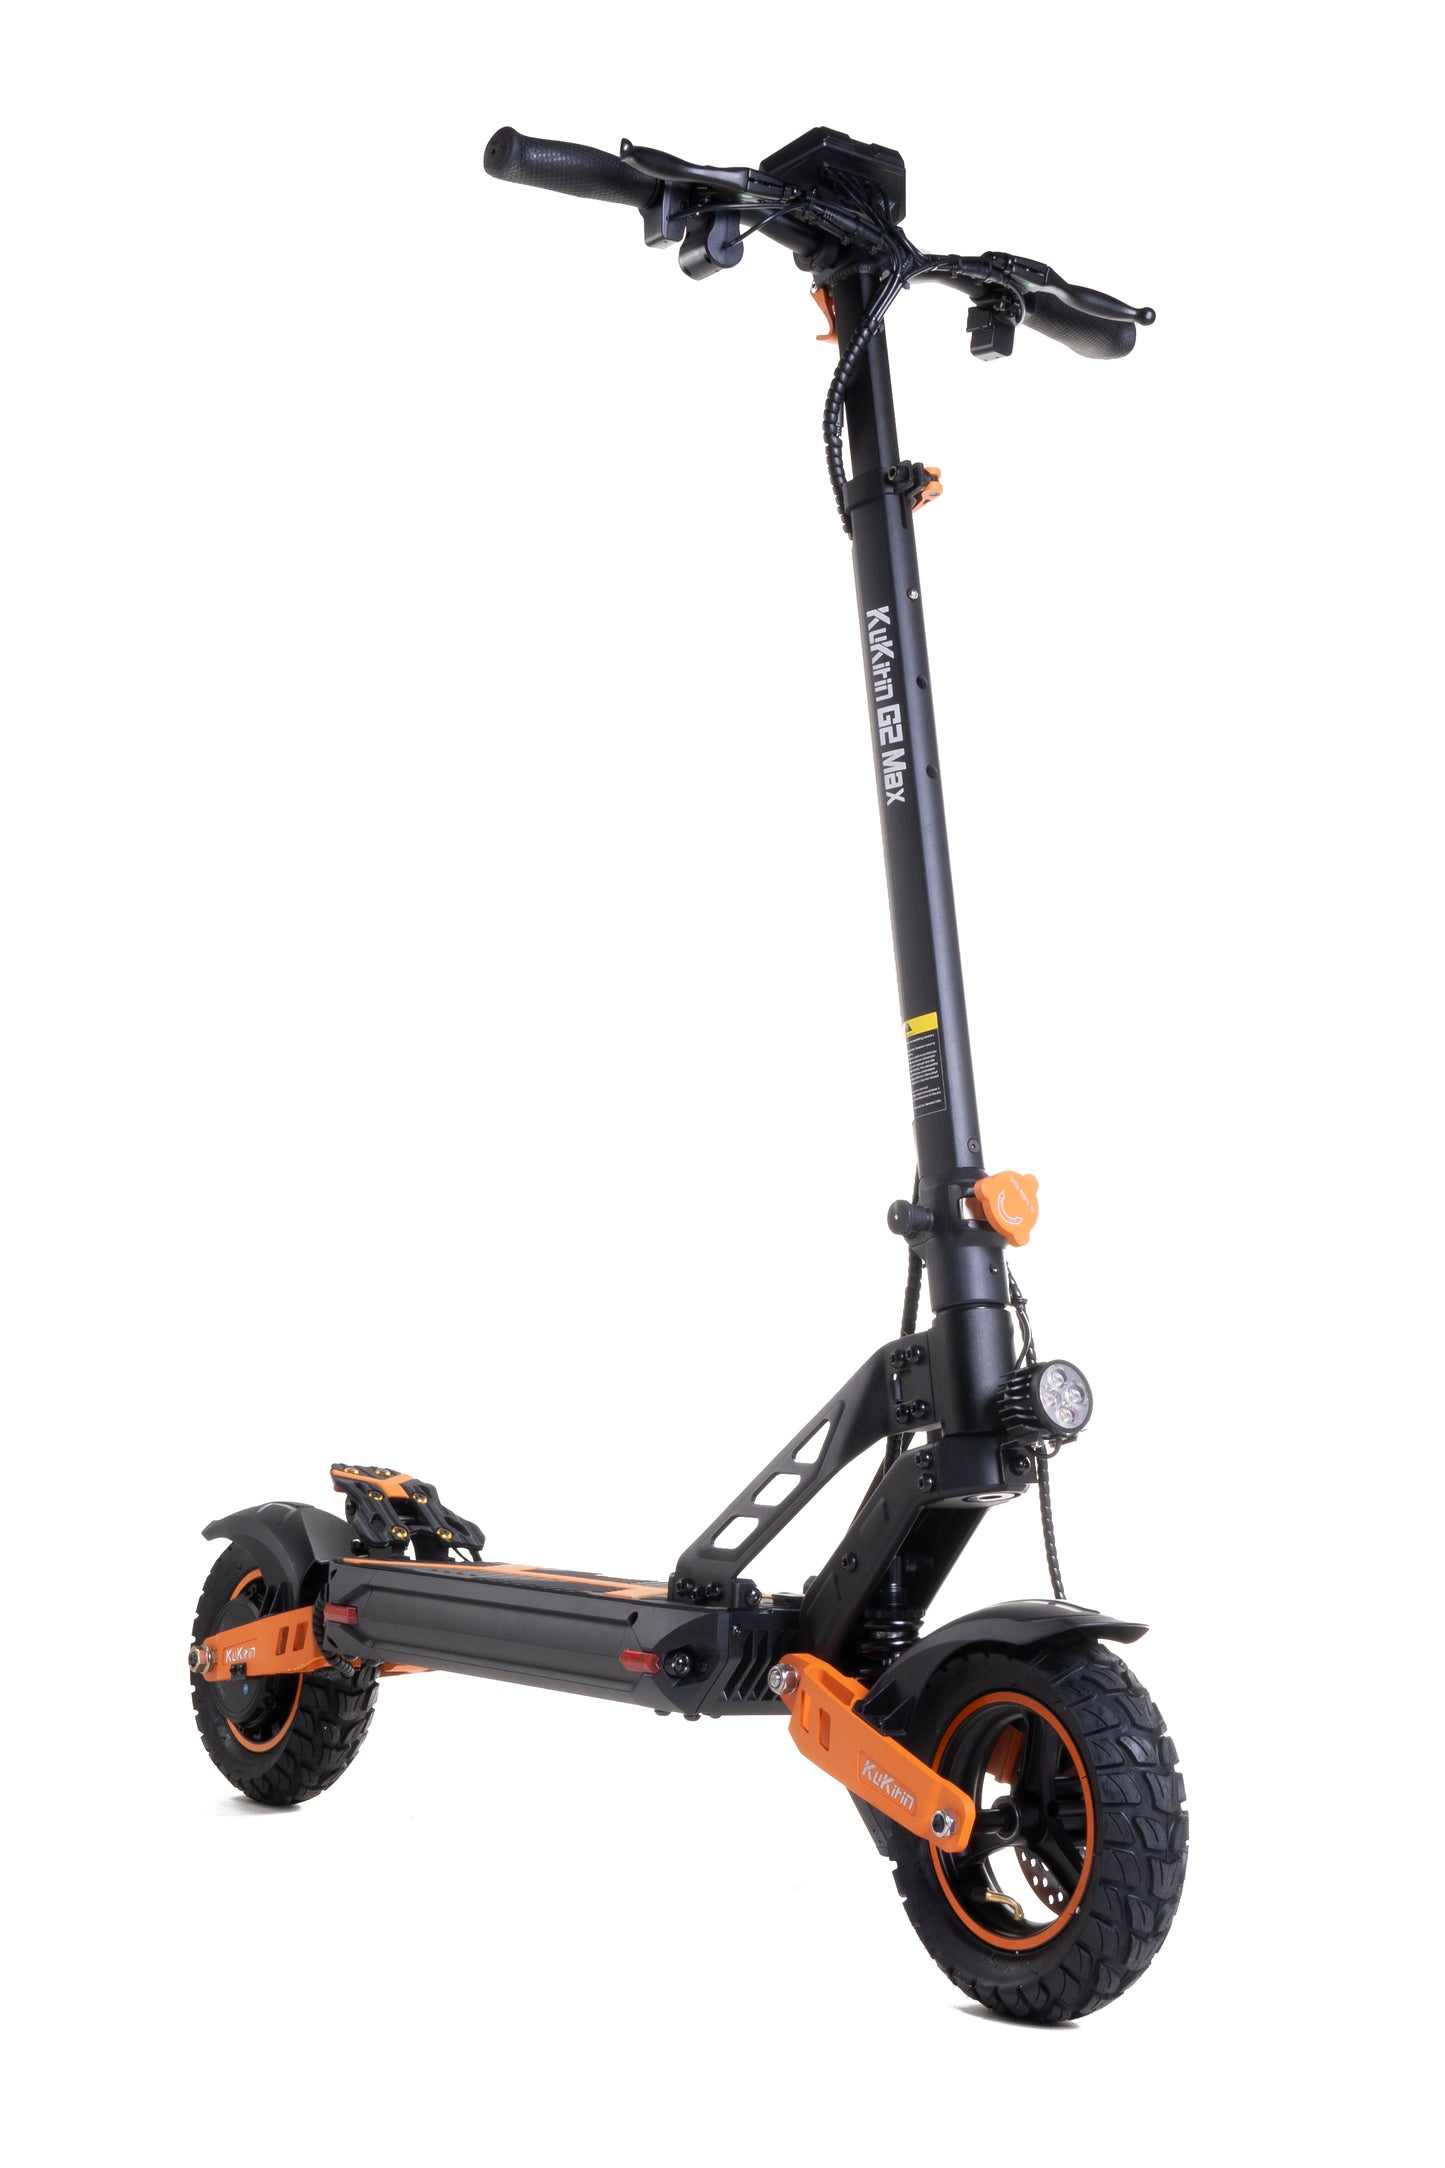 KUKIRIN G2 Max Electric Scooter | 960WH Power | 1000W Motor